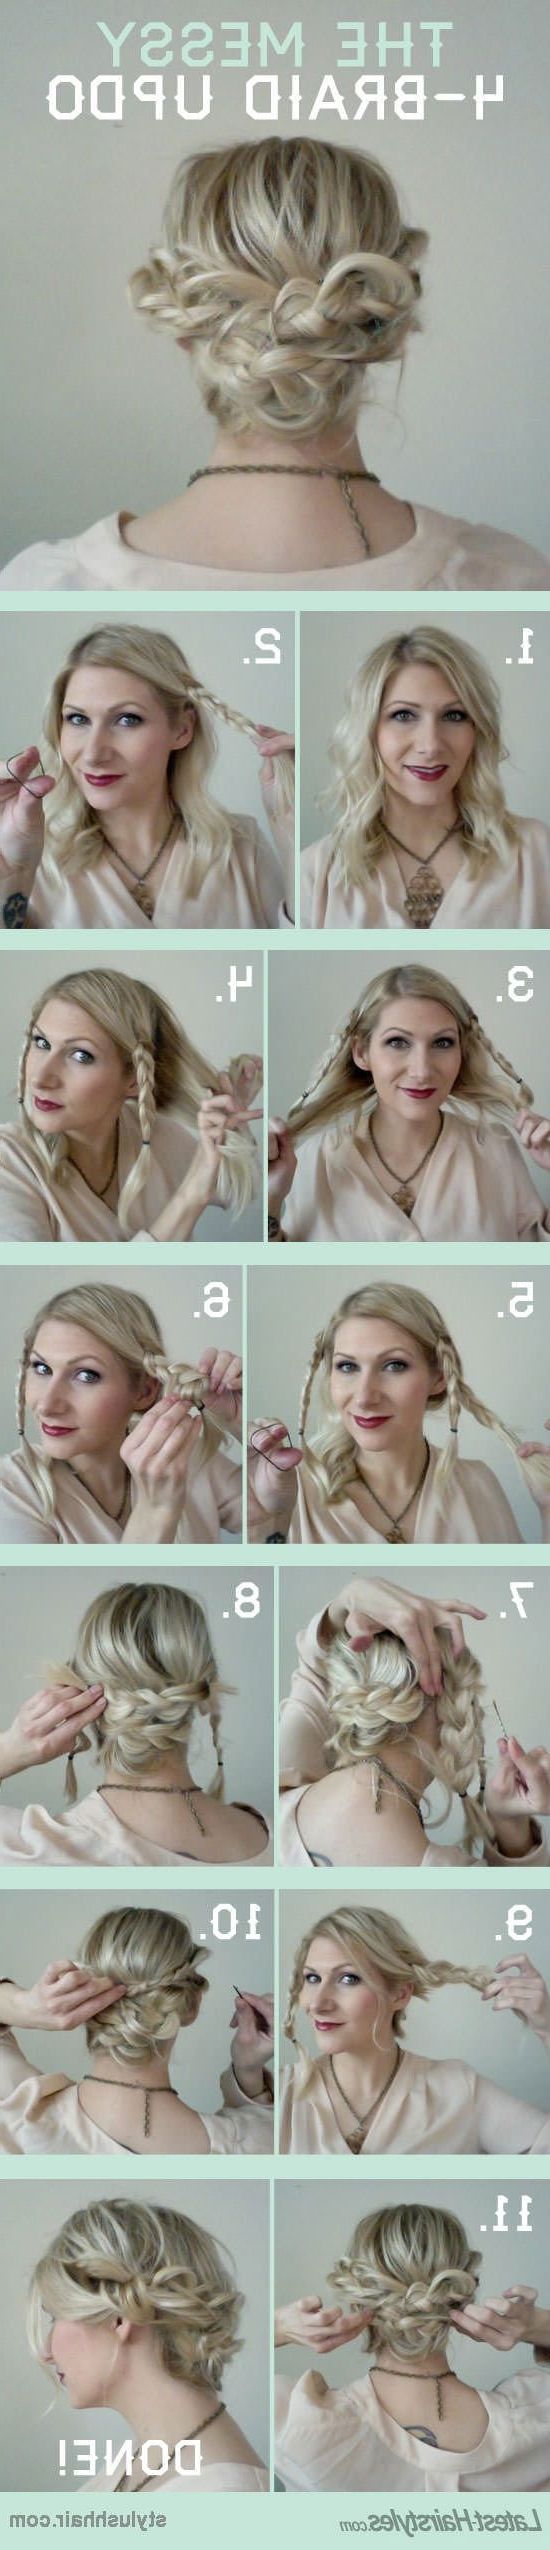 15 Cute And Easy Hairstyle Tutorials For Medium Length Hair – Gurl Regarding Cute And Easy Updos For Medium Length Hair (View 13 of 15)